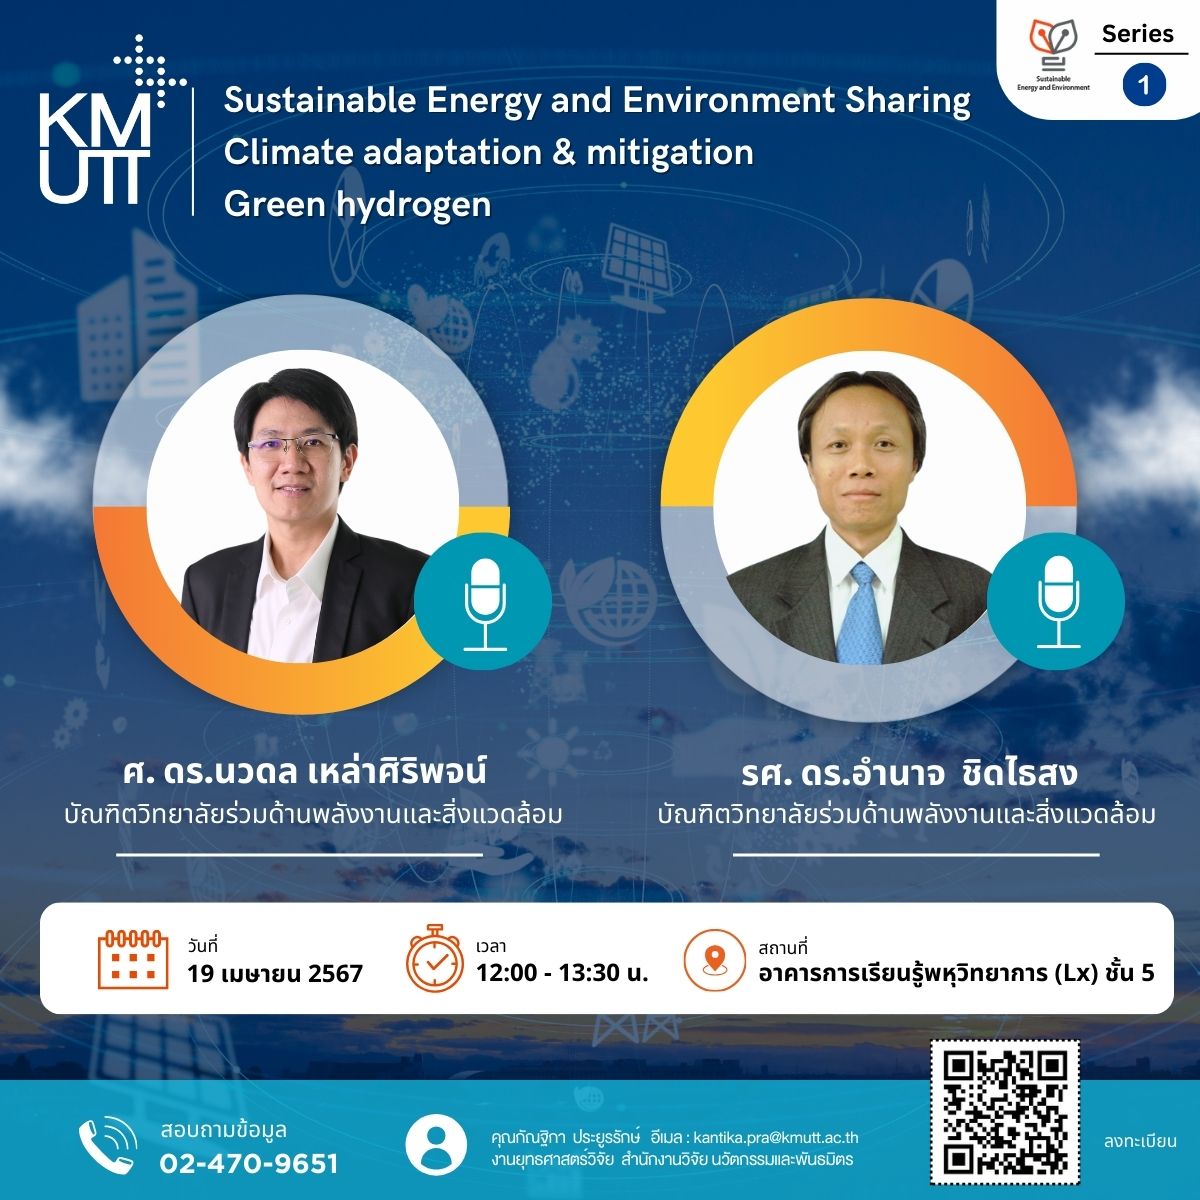 Sustainable Energy and Environment Sharing